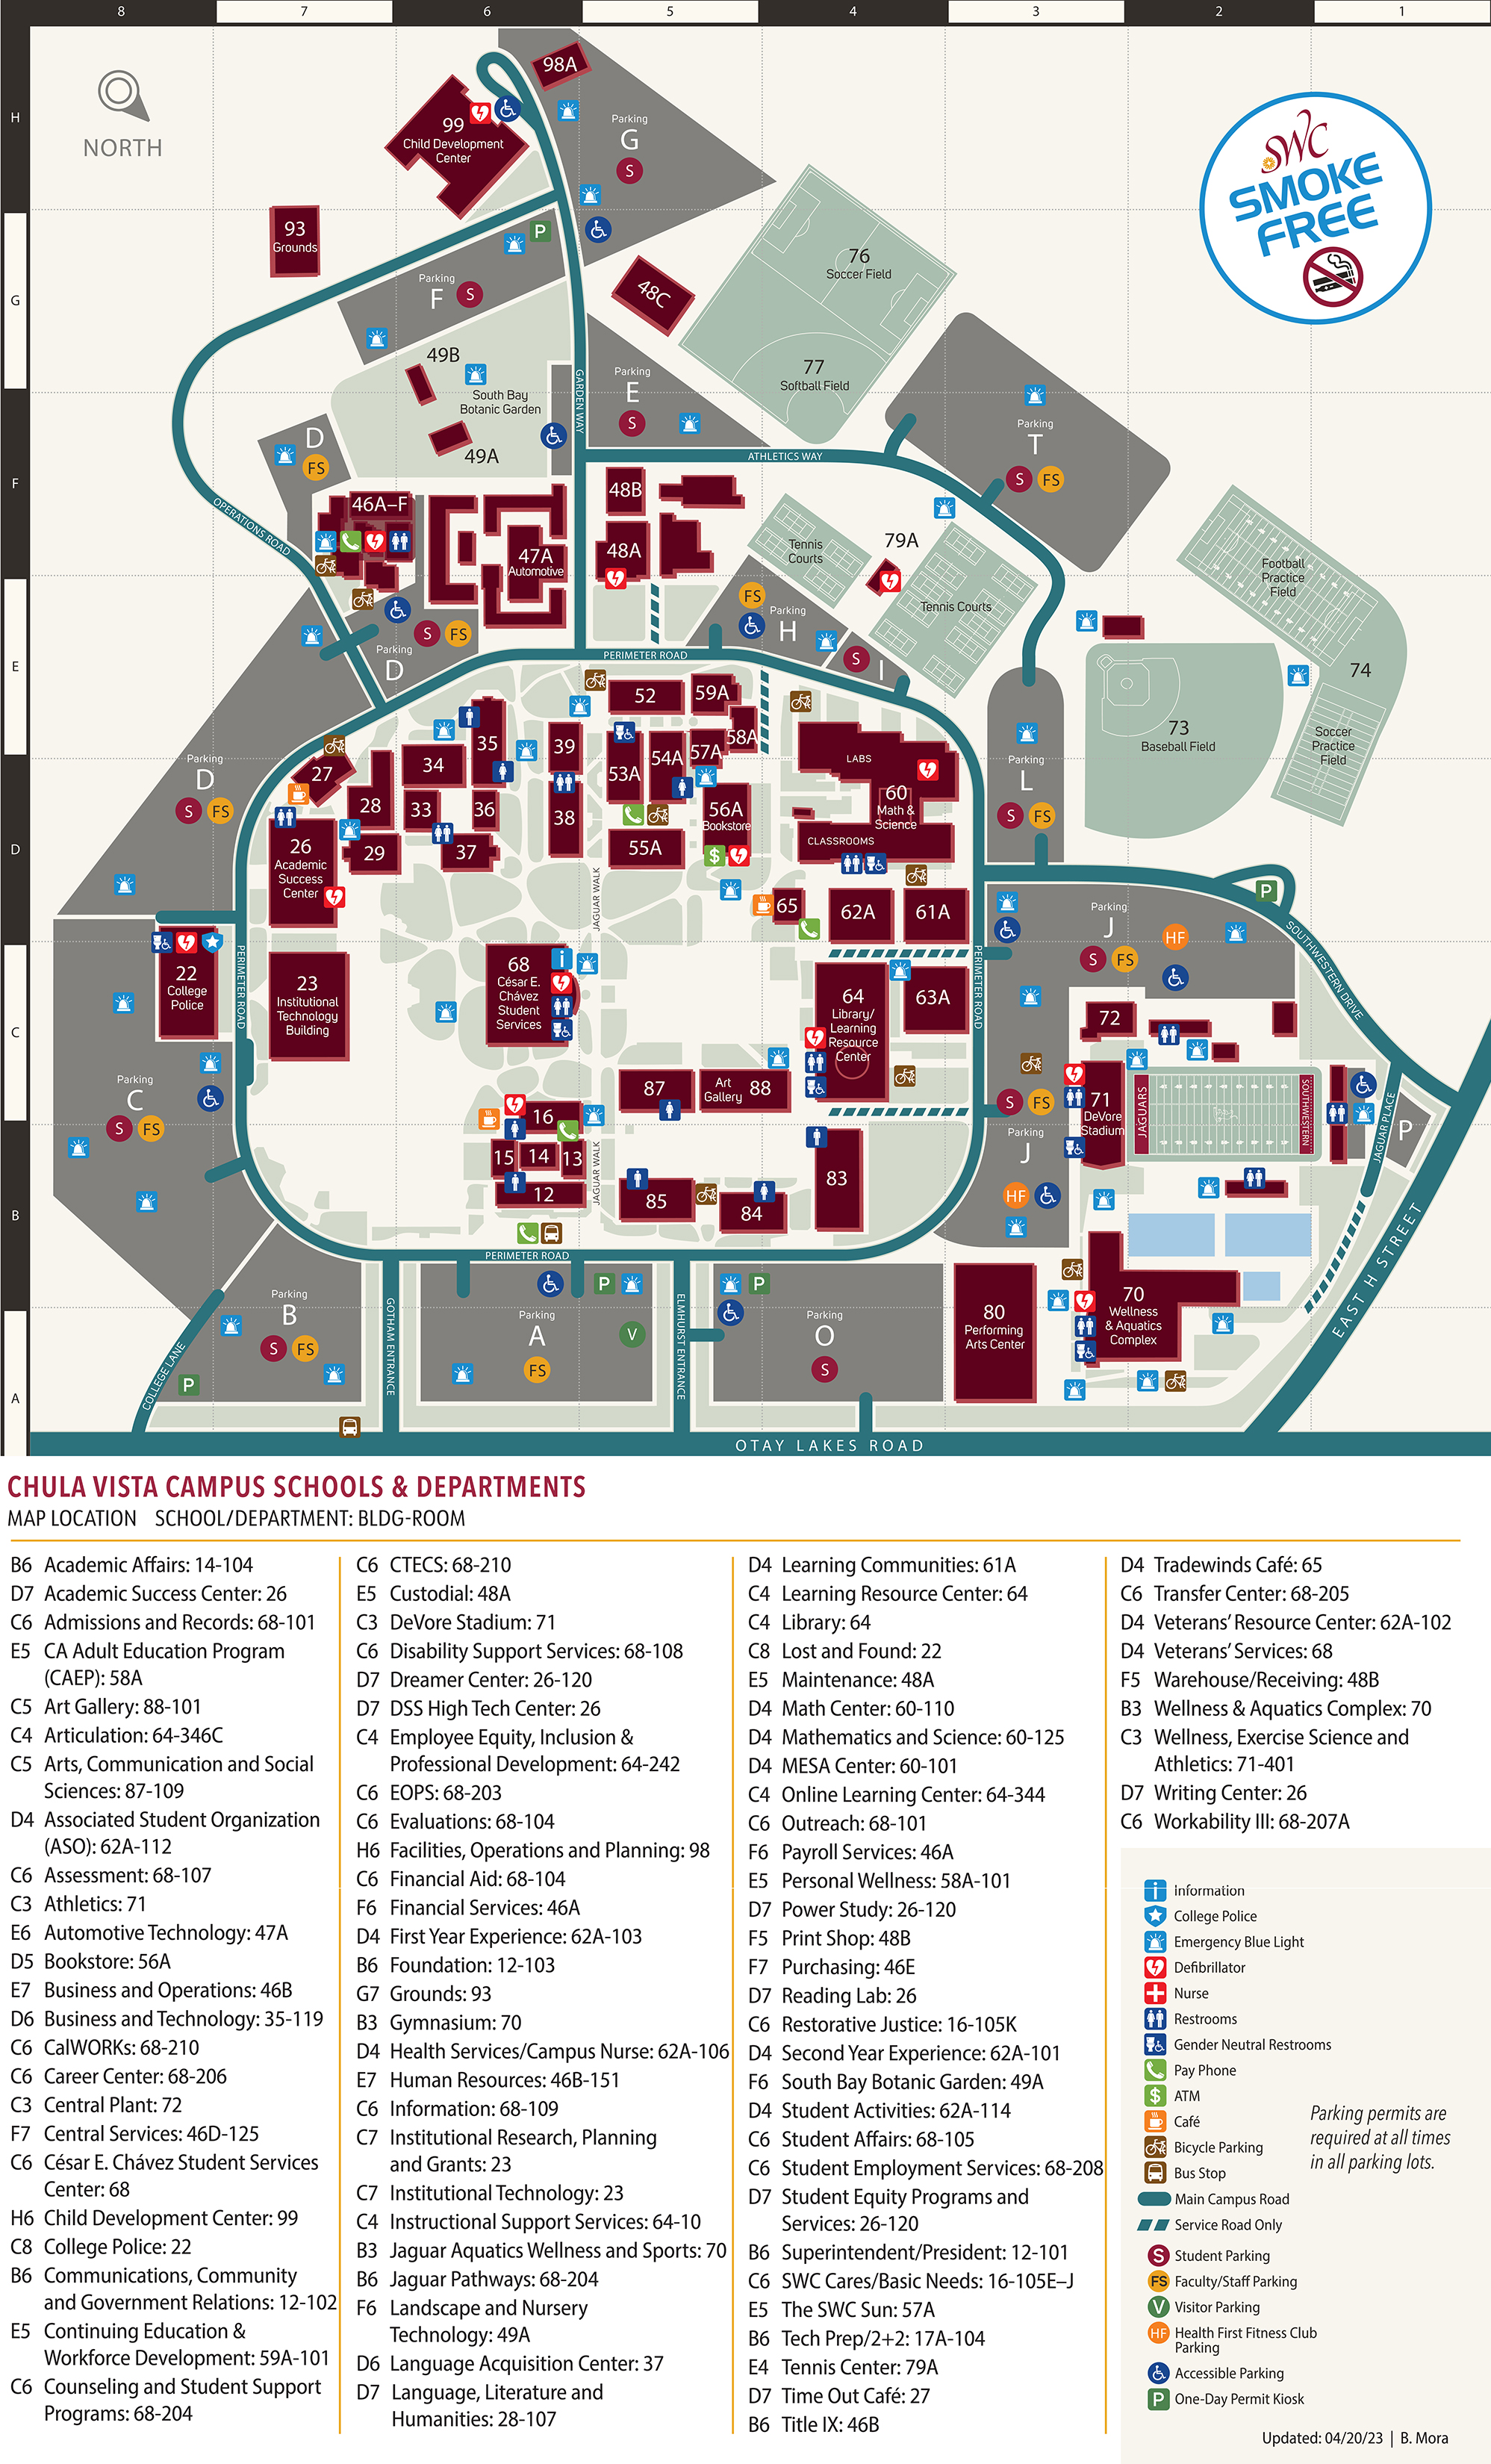 Campus Map for Chula Vista